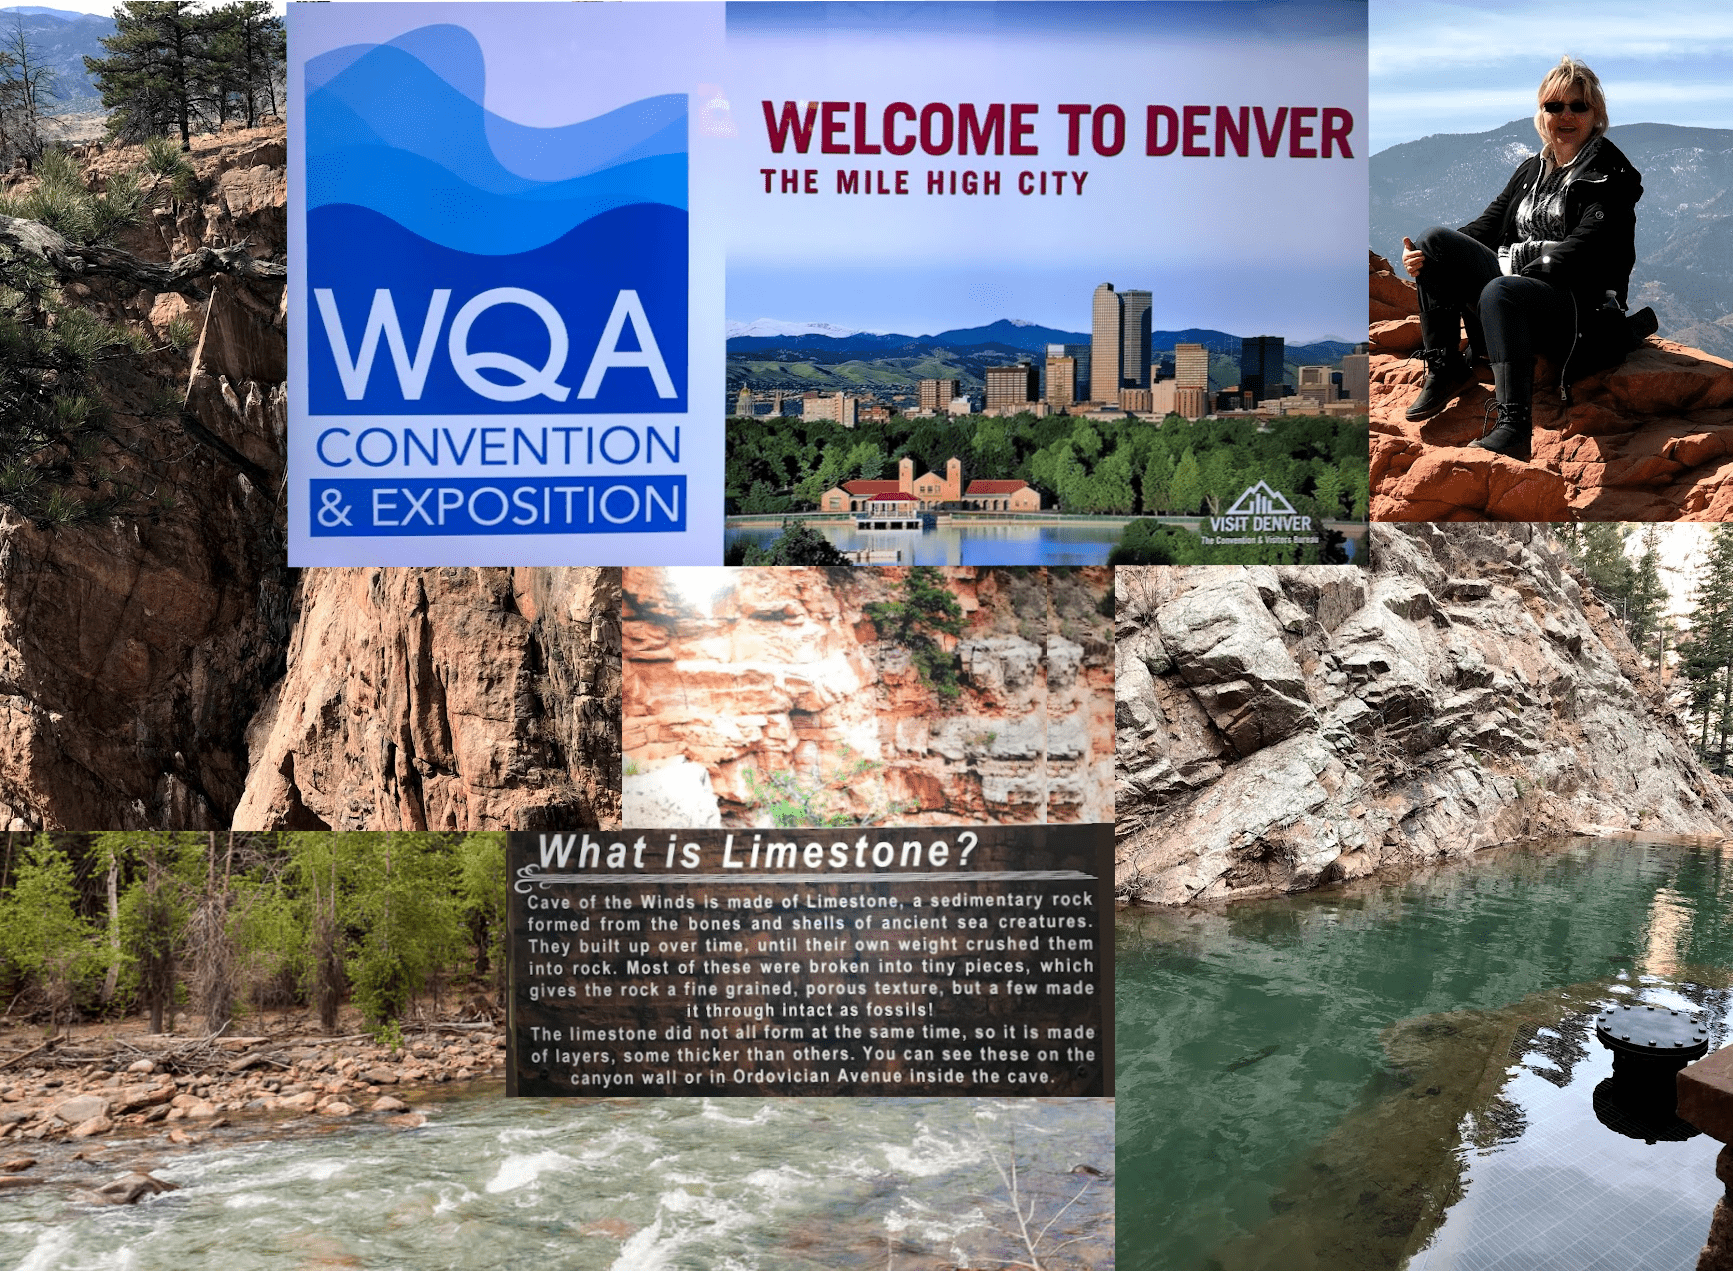 Picture Collage of Denise Carabetta, CWR's trip to the WQA Convention & Exposition in Denver, CO.